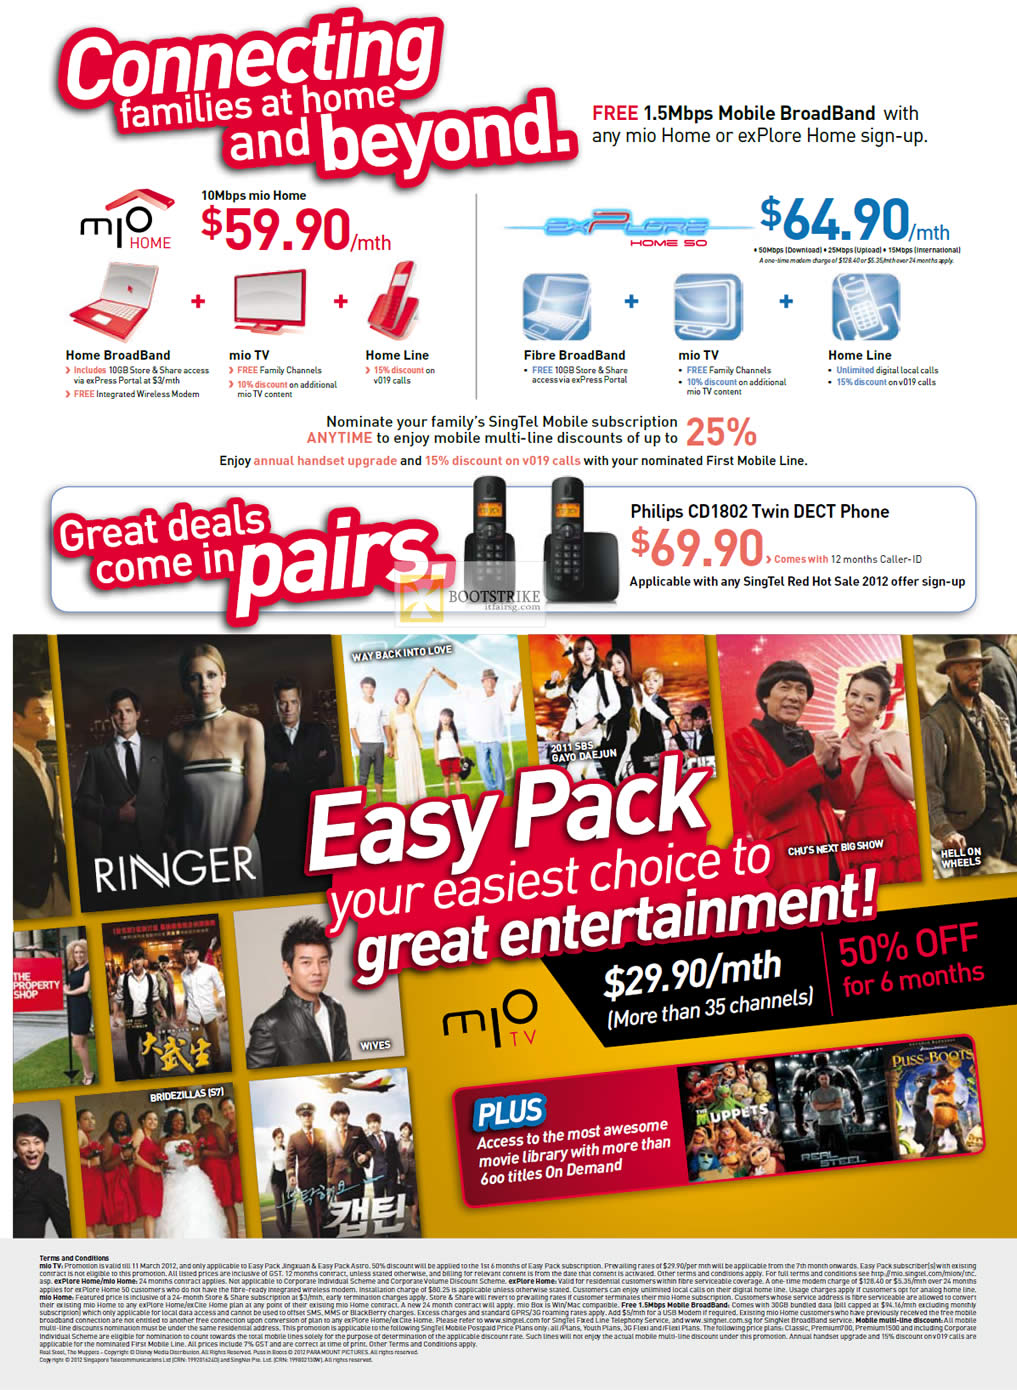 IT SHOW 2012 price list image brochure of Singtel Mio Home 10Mbps, Fibre Broadband Explore Home 50, Philips CD1802 Twin DECT Phone, Mio TV Easy Pack